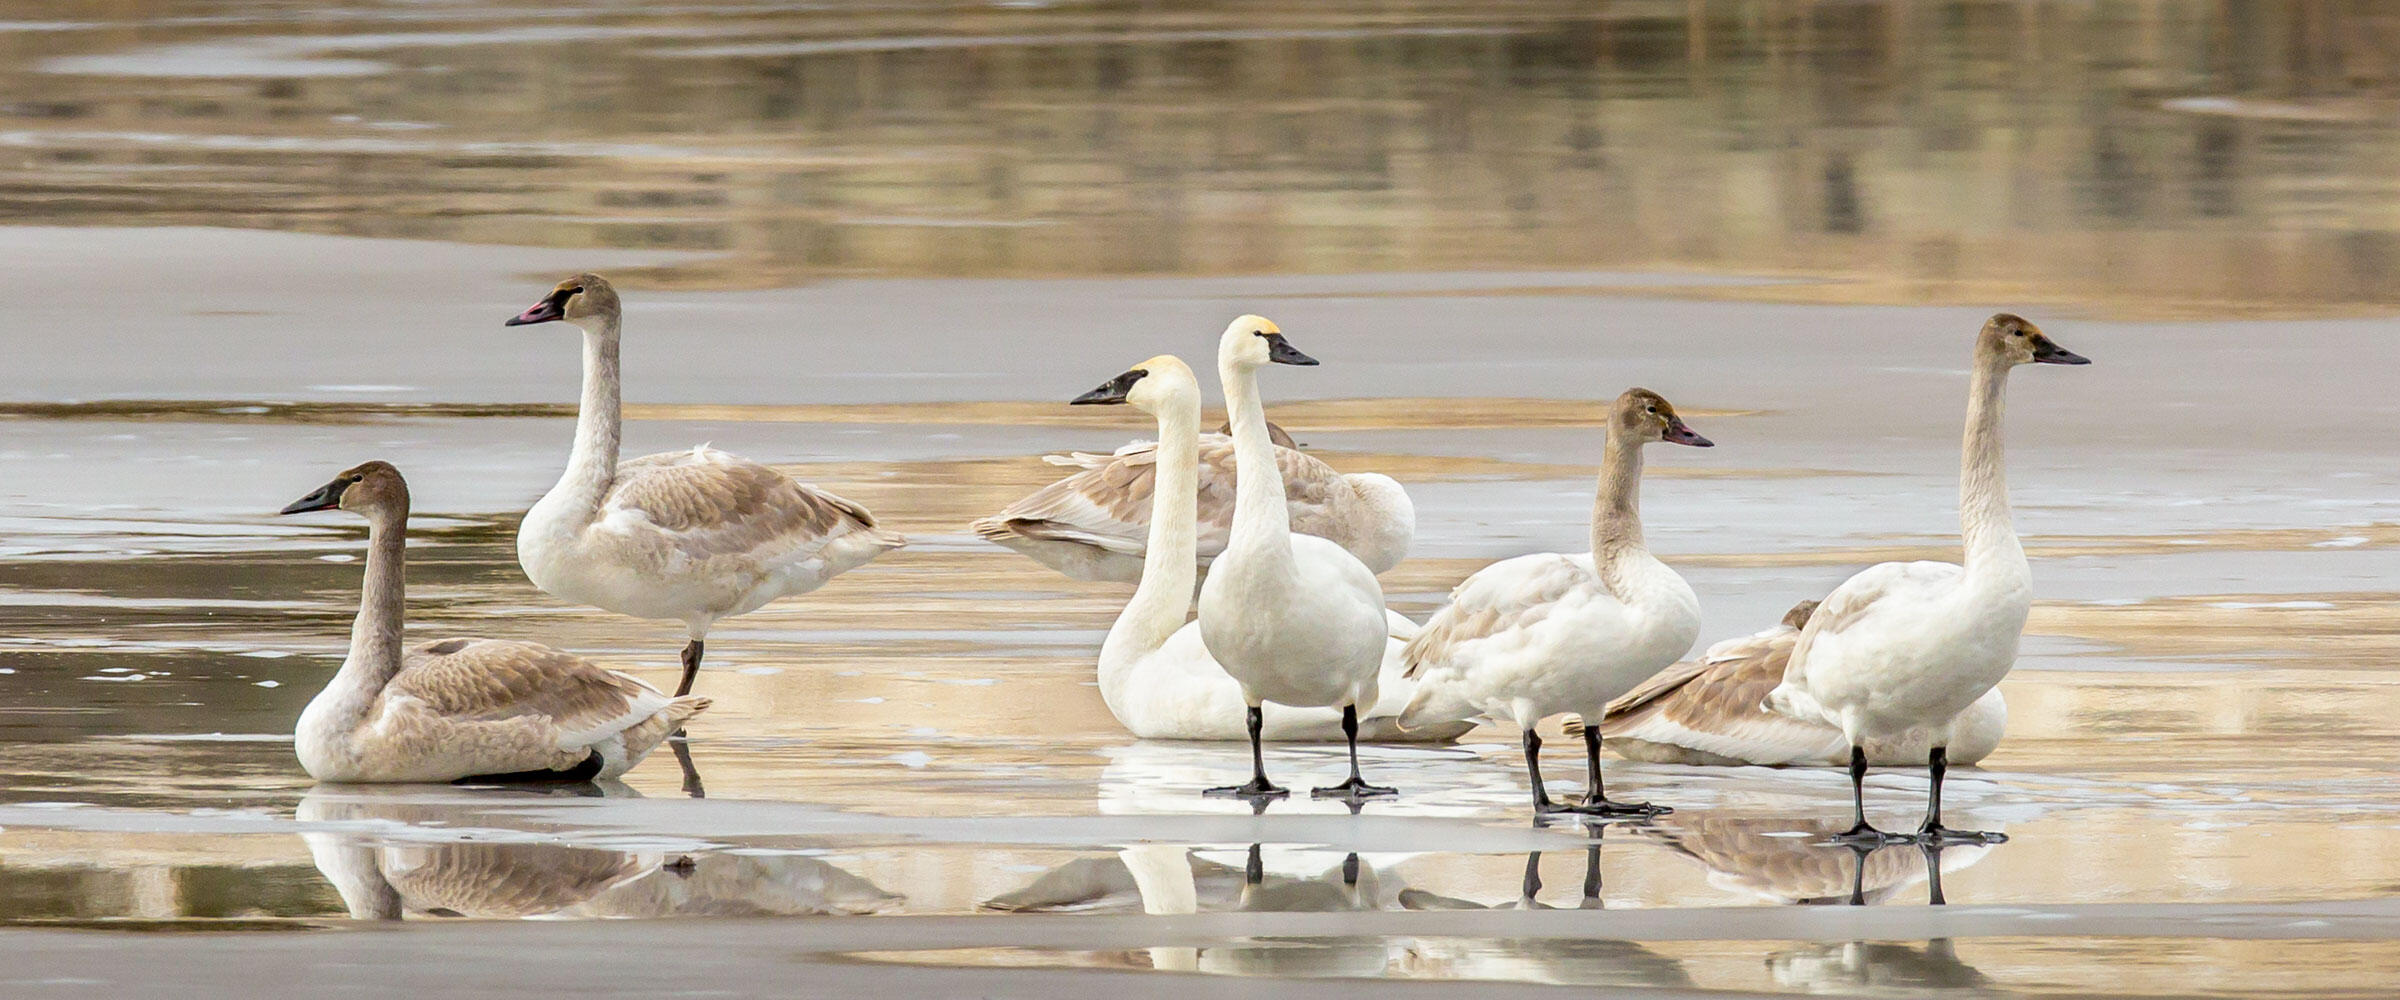 Tundra and Trumpeter swans stand on ice.